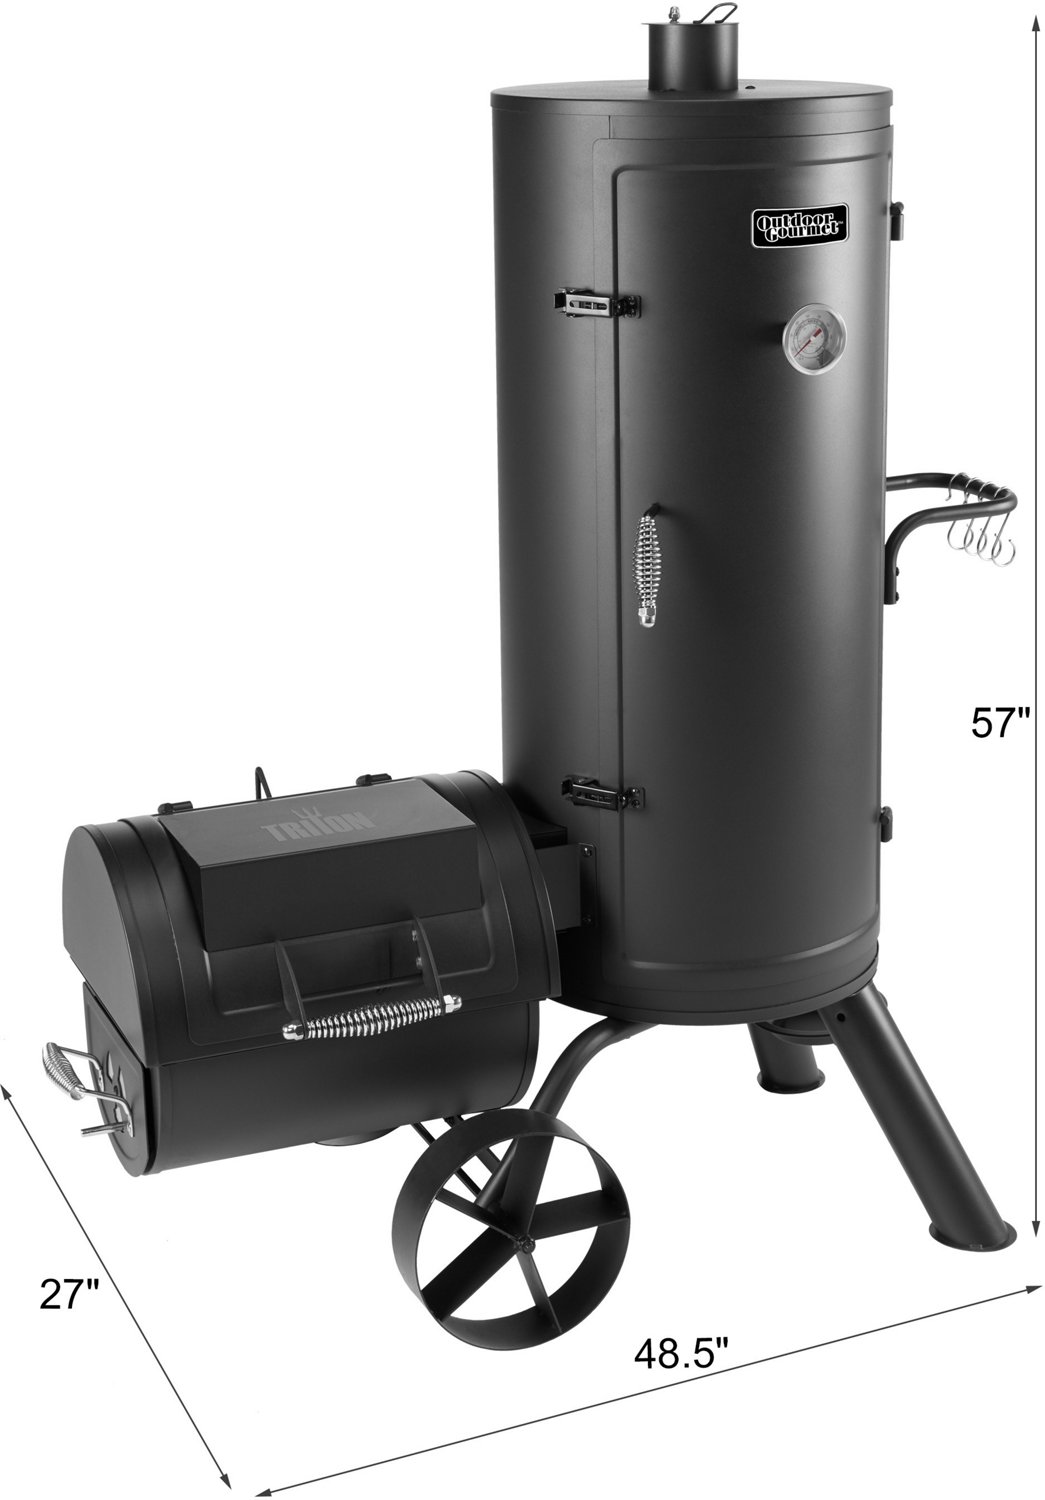 All About Vertical Water Smokers Fueled By Charcoal, Electric and Gas